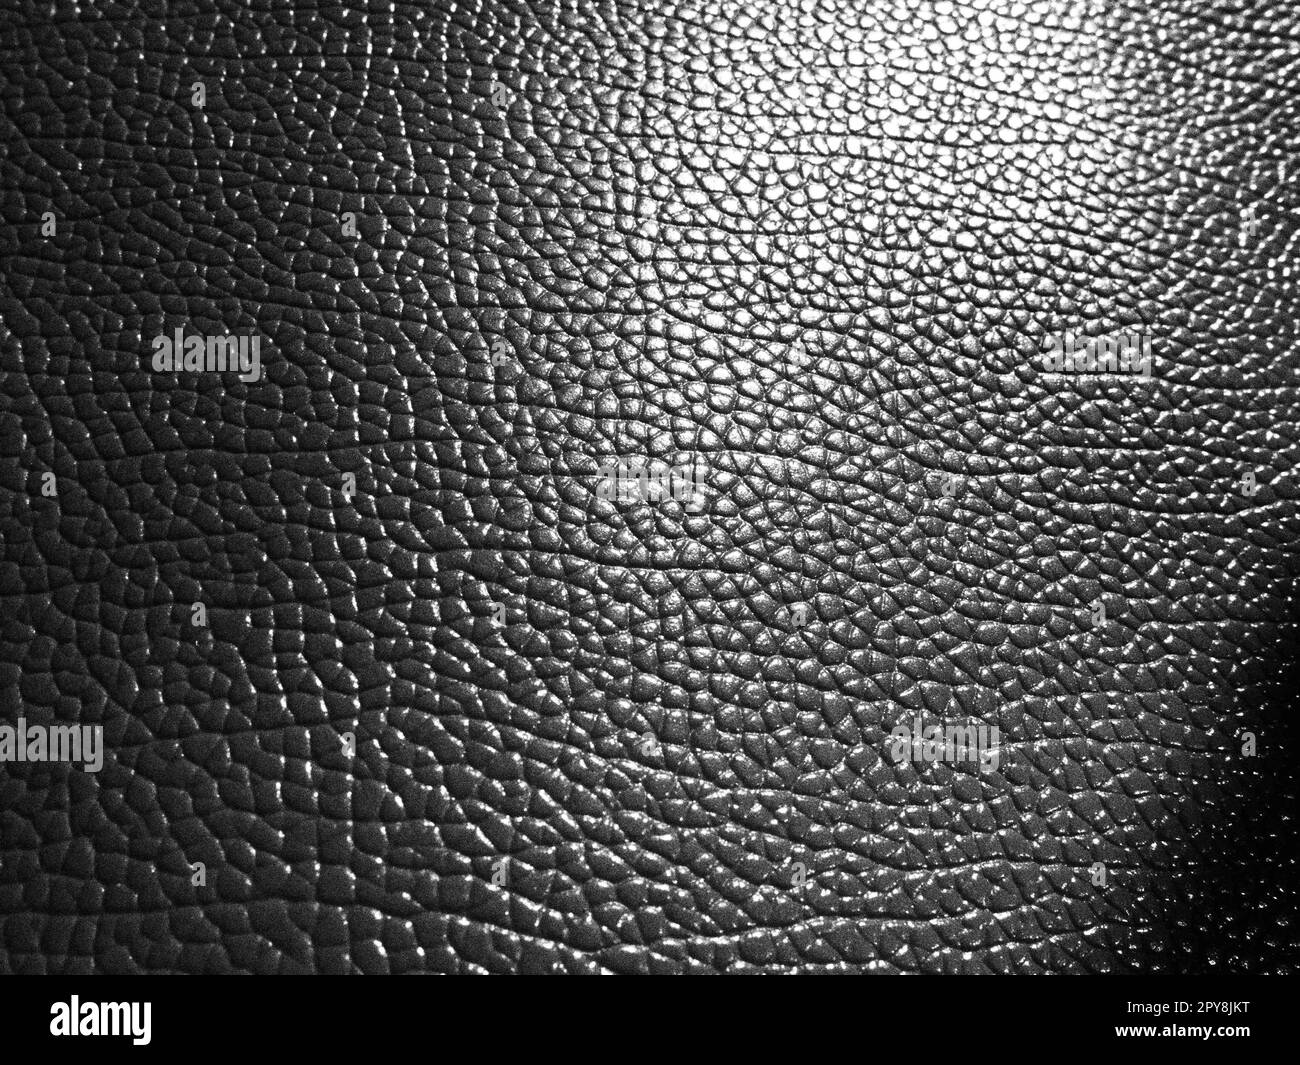 Leather texture. Black and white monochrome photography. Close-up. Black artificial leather, material for sewing clothes and accessories, upholstery Stock Photo